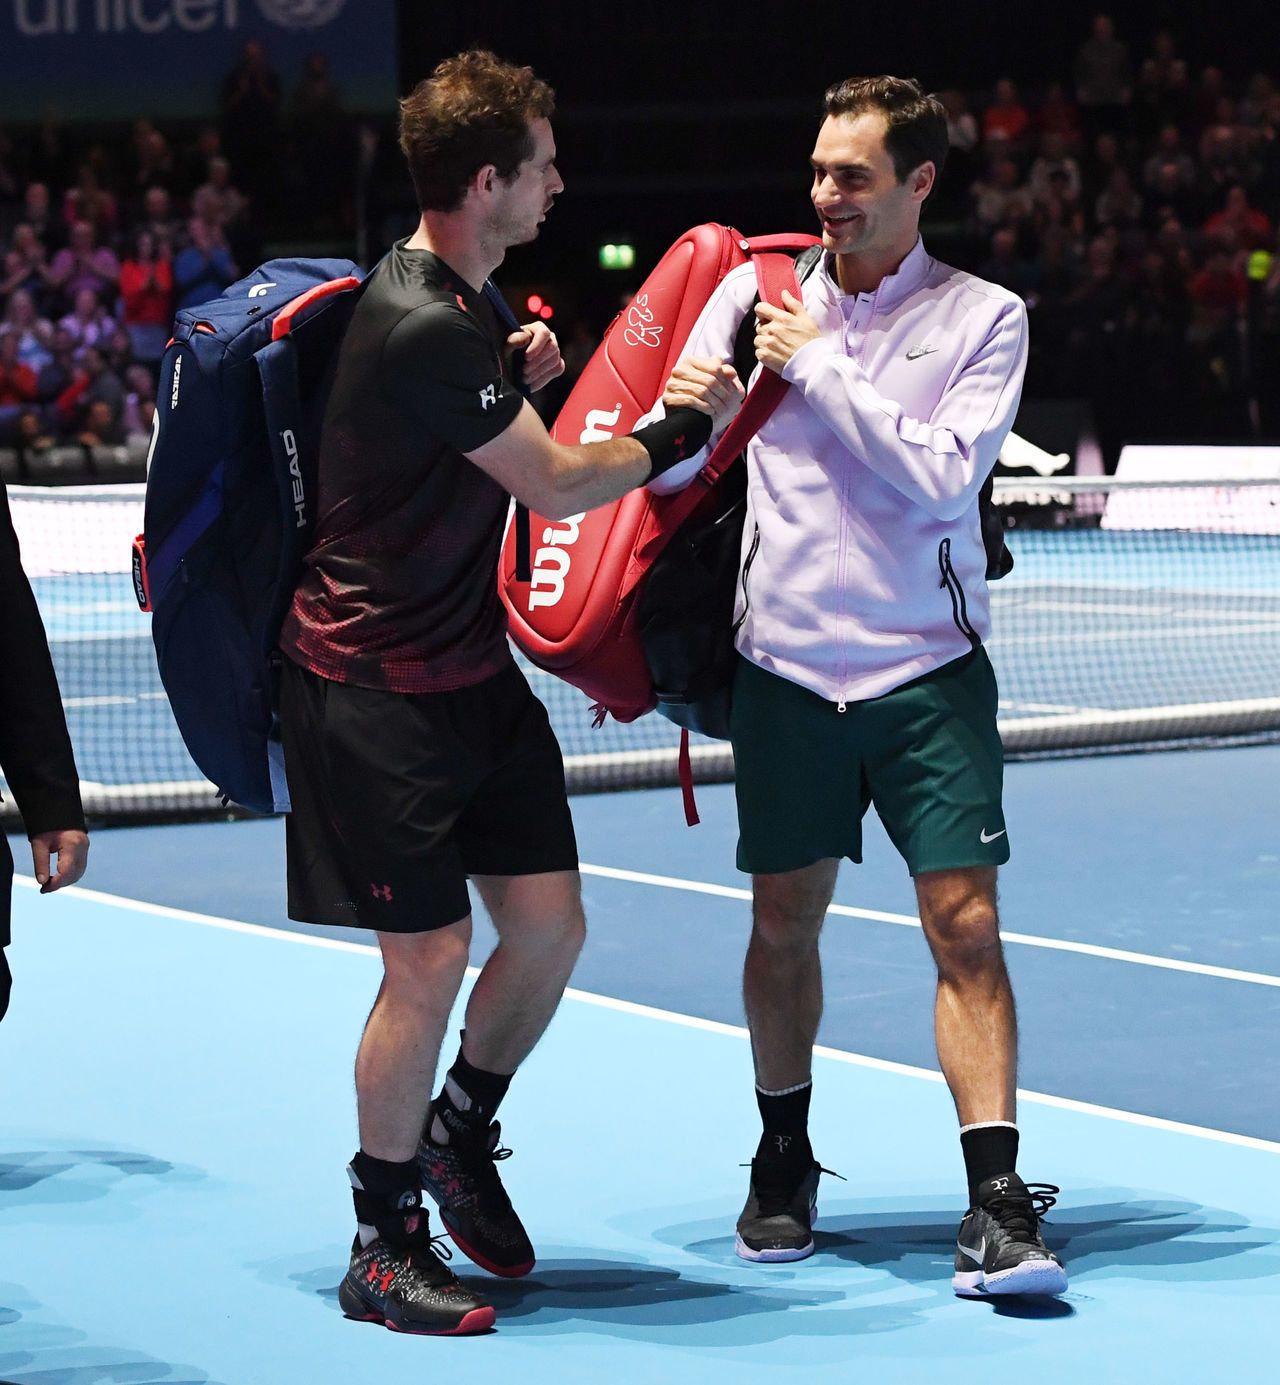 Murray and Federer put on an entertaining show for the Glasgow crowd.